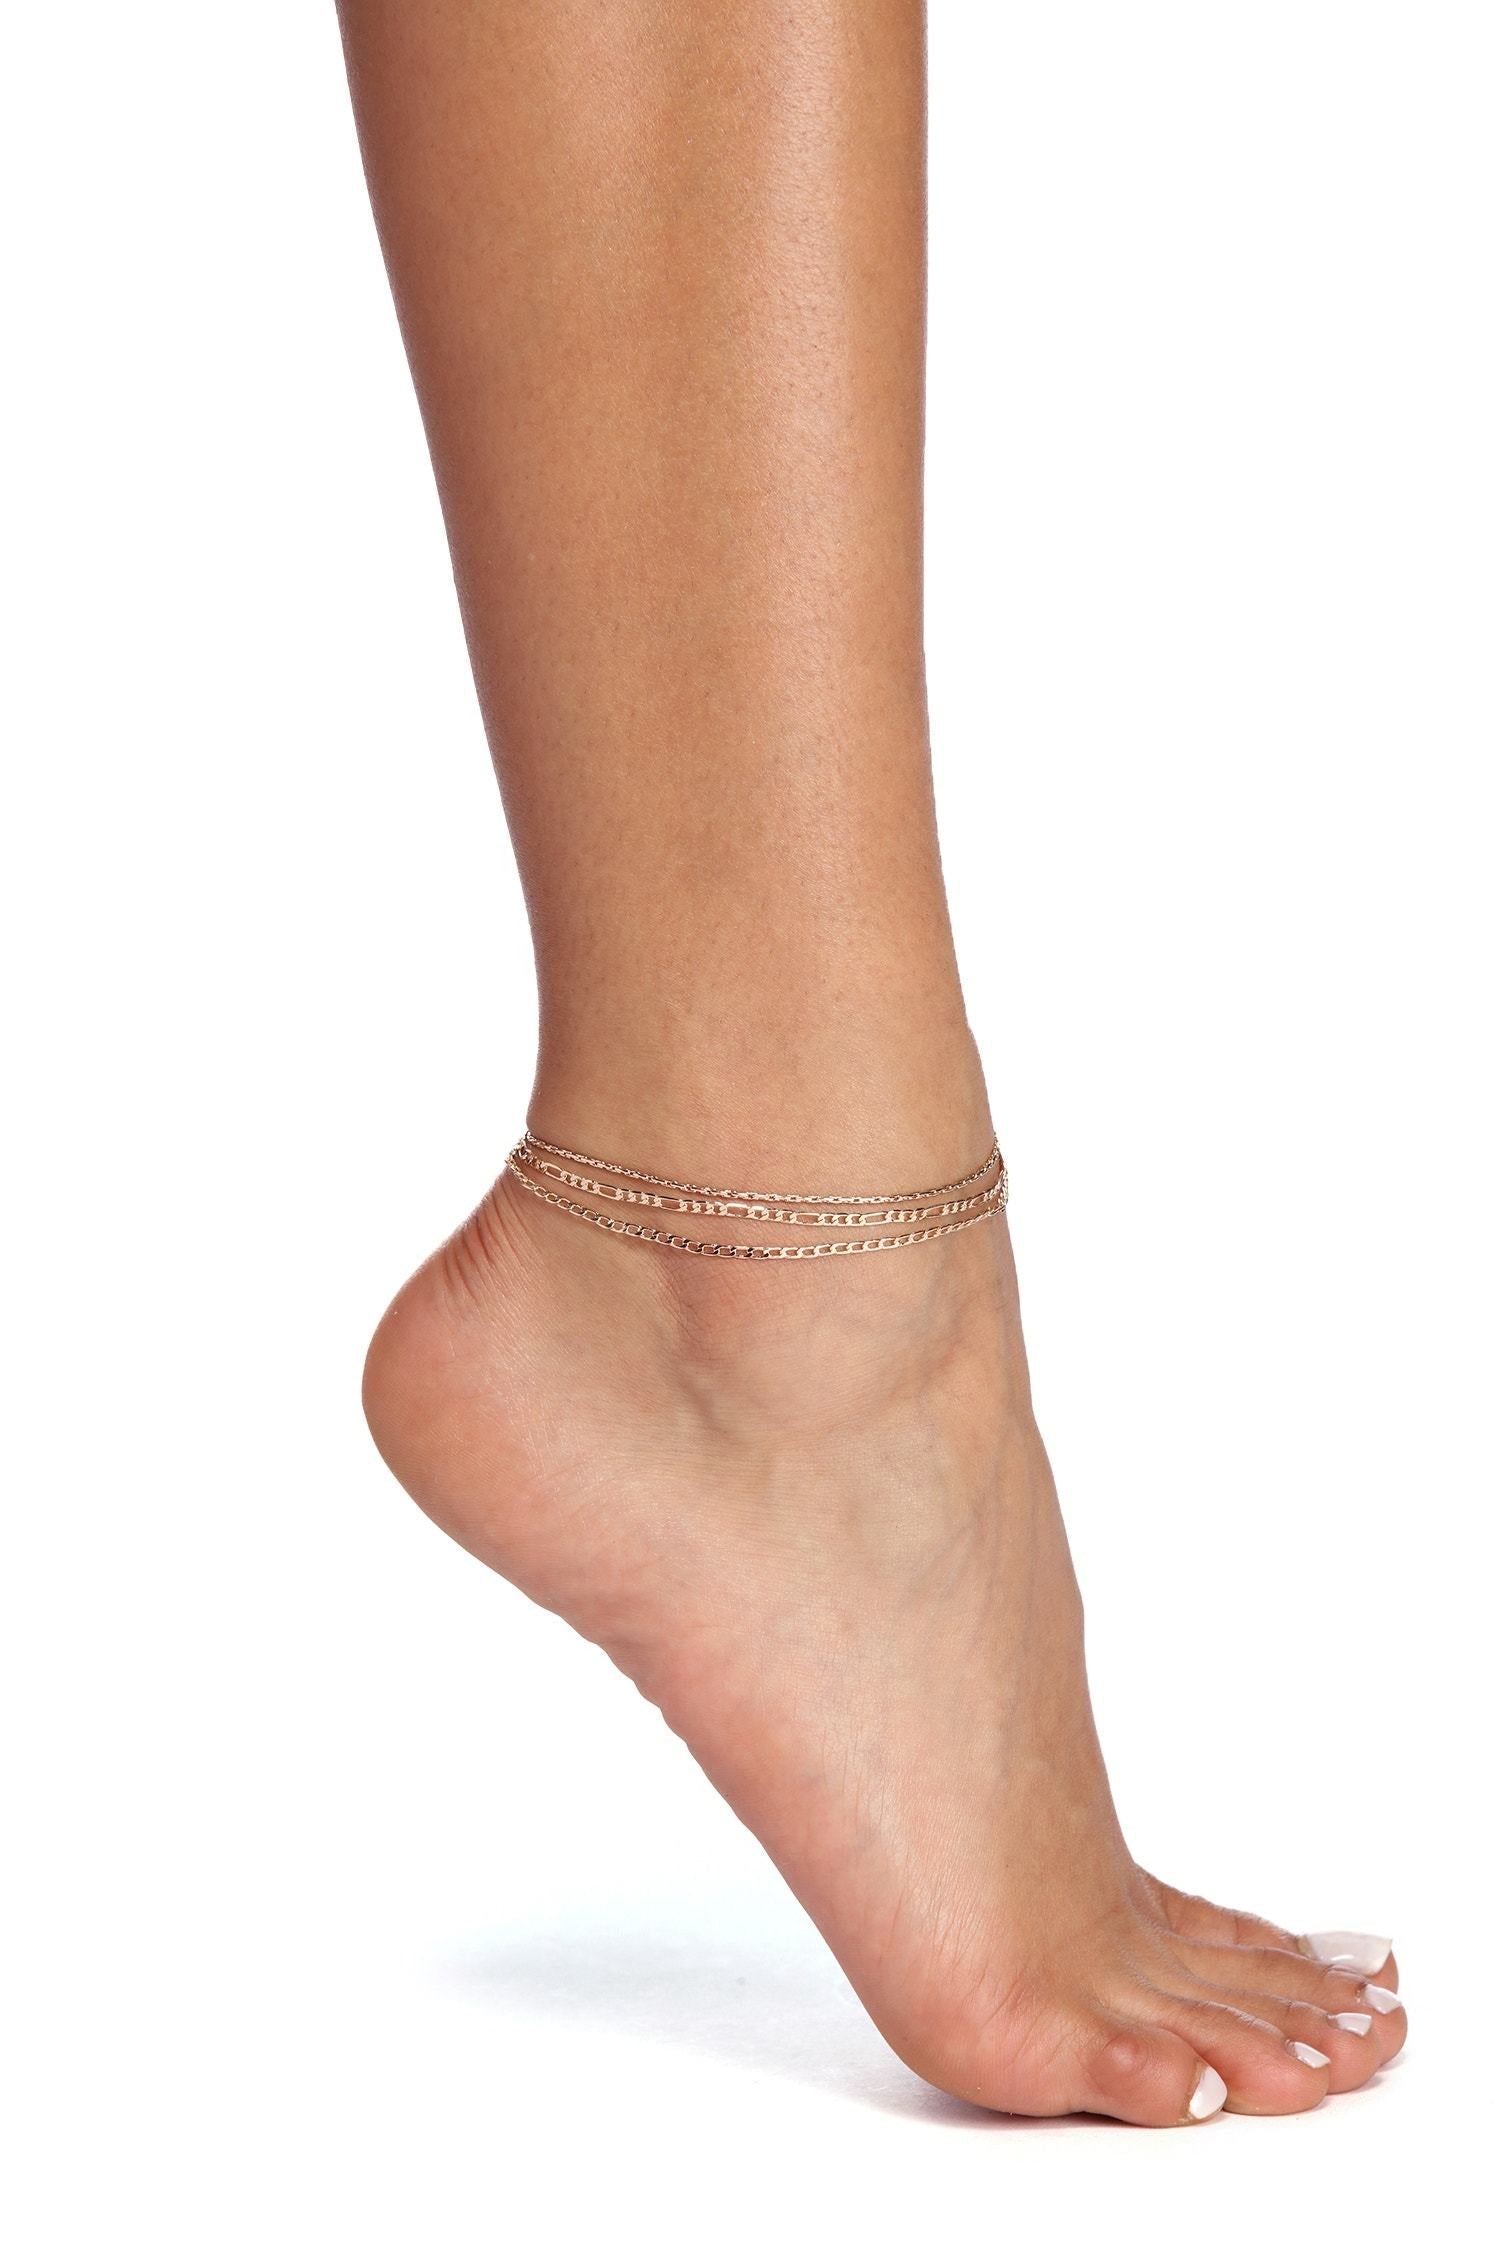 Dainty 3 Row Chain Anklet